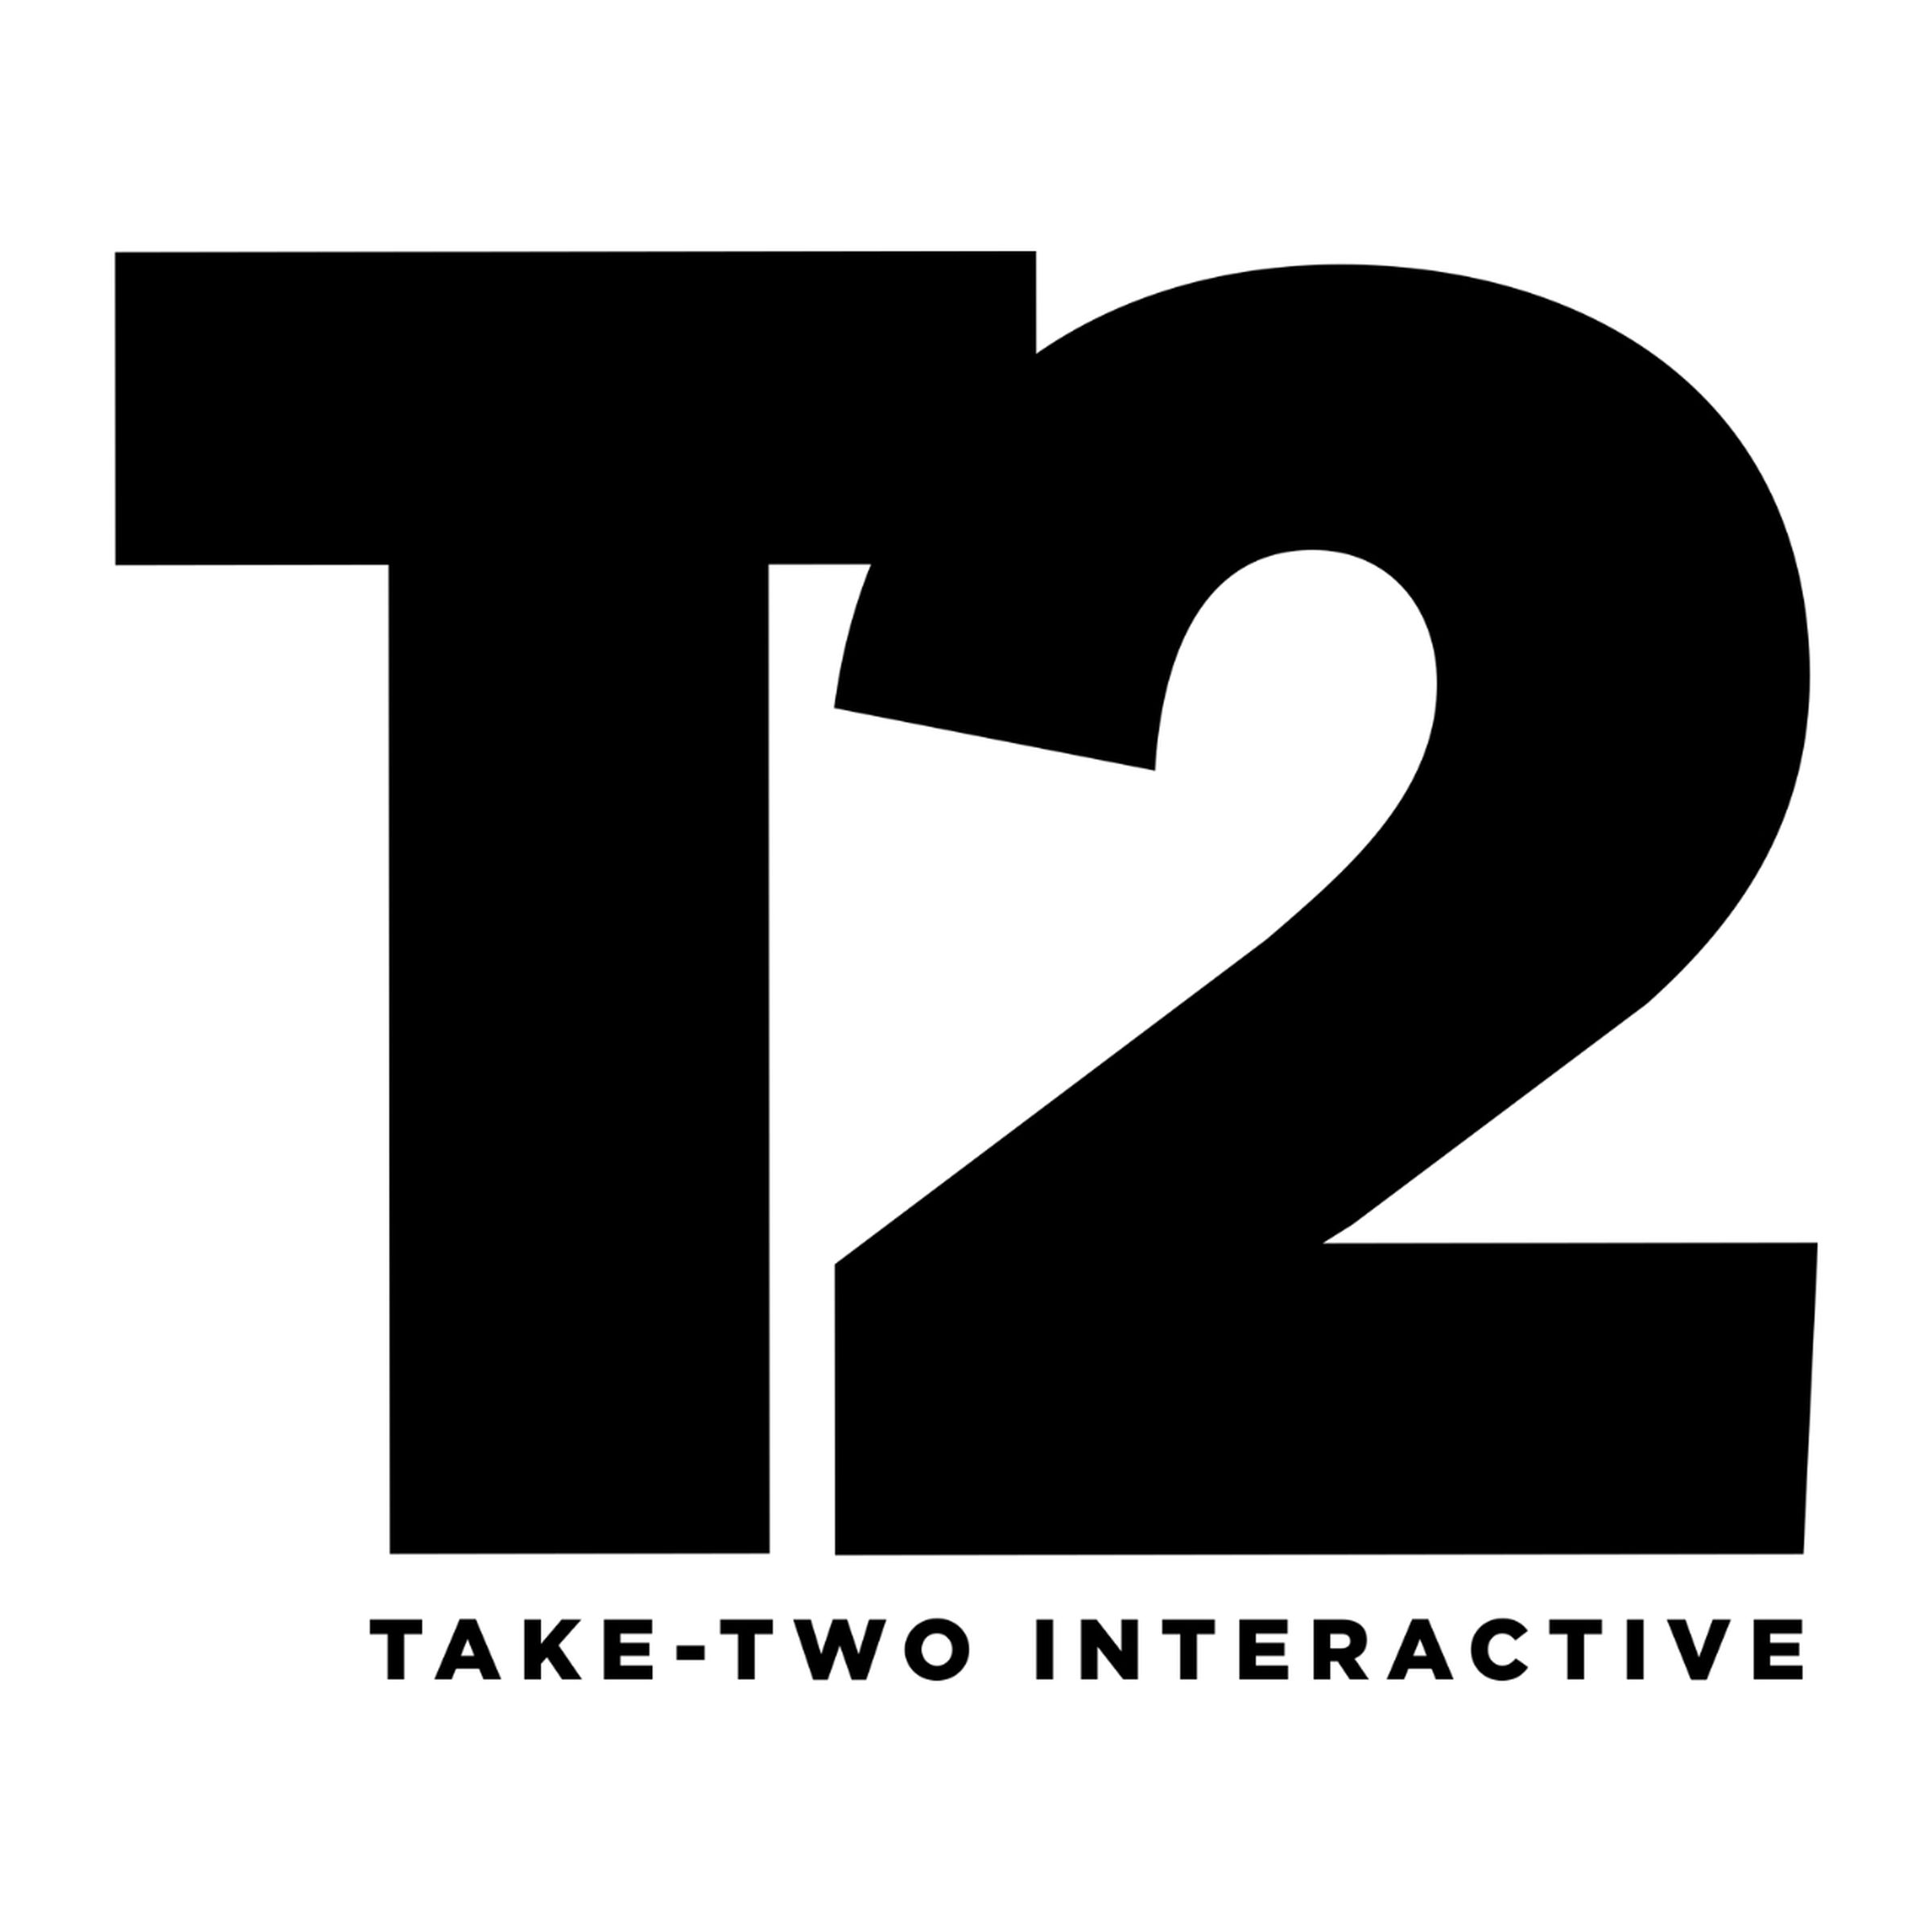 The Take-Two Interactive logo against a white background.